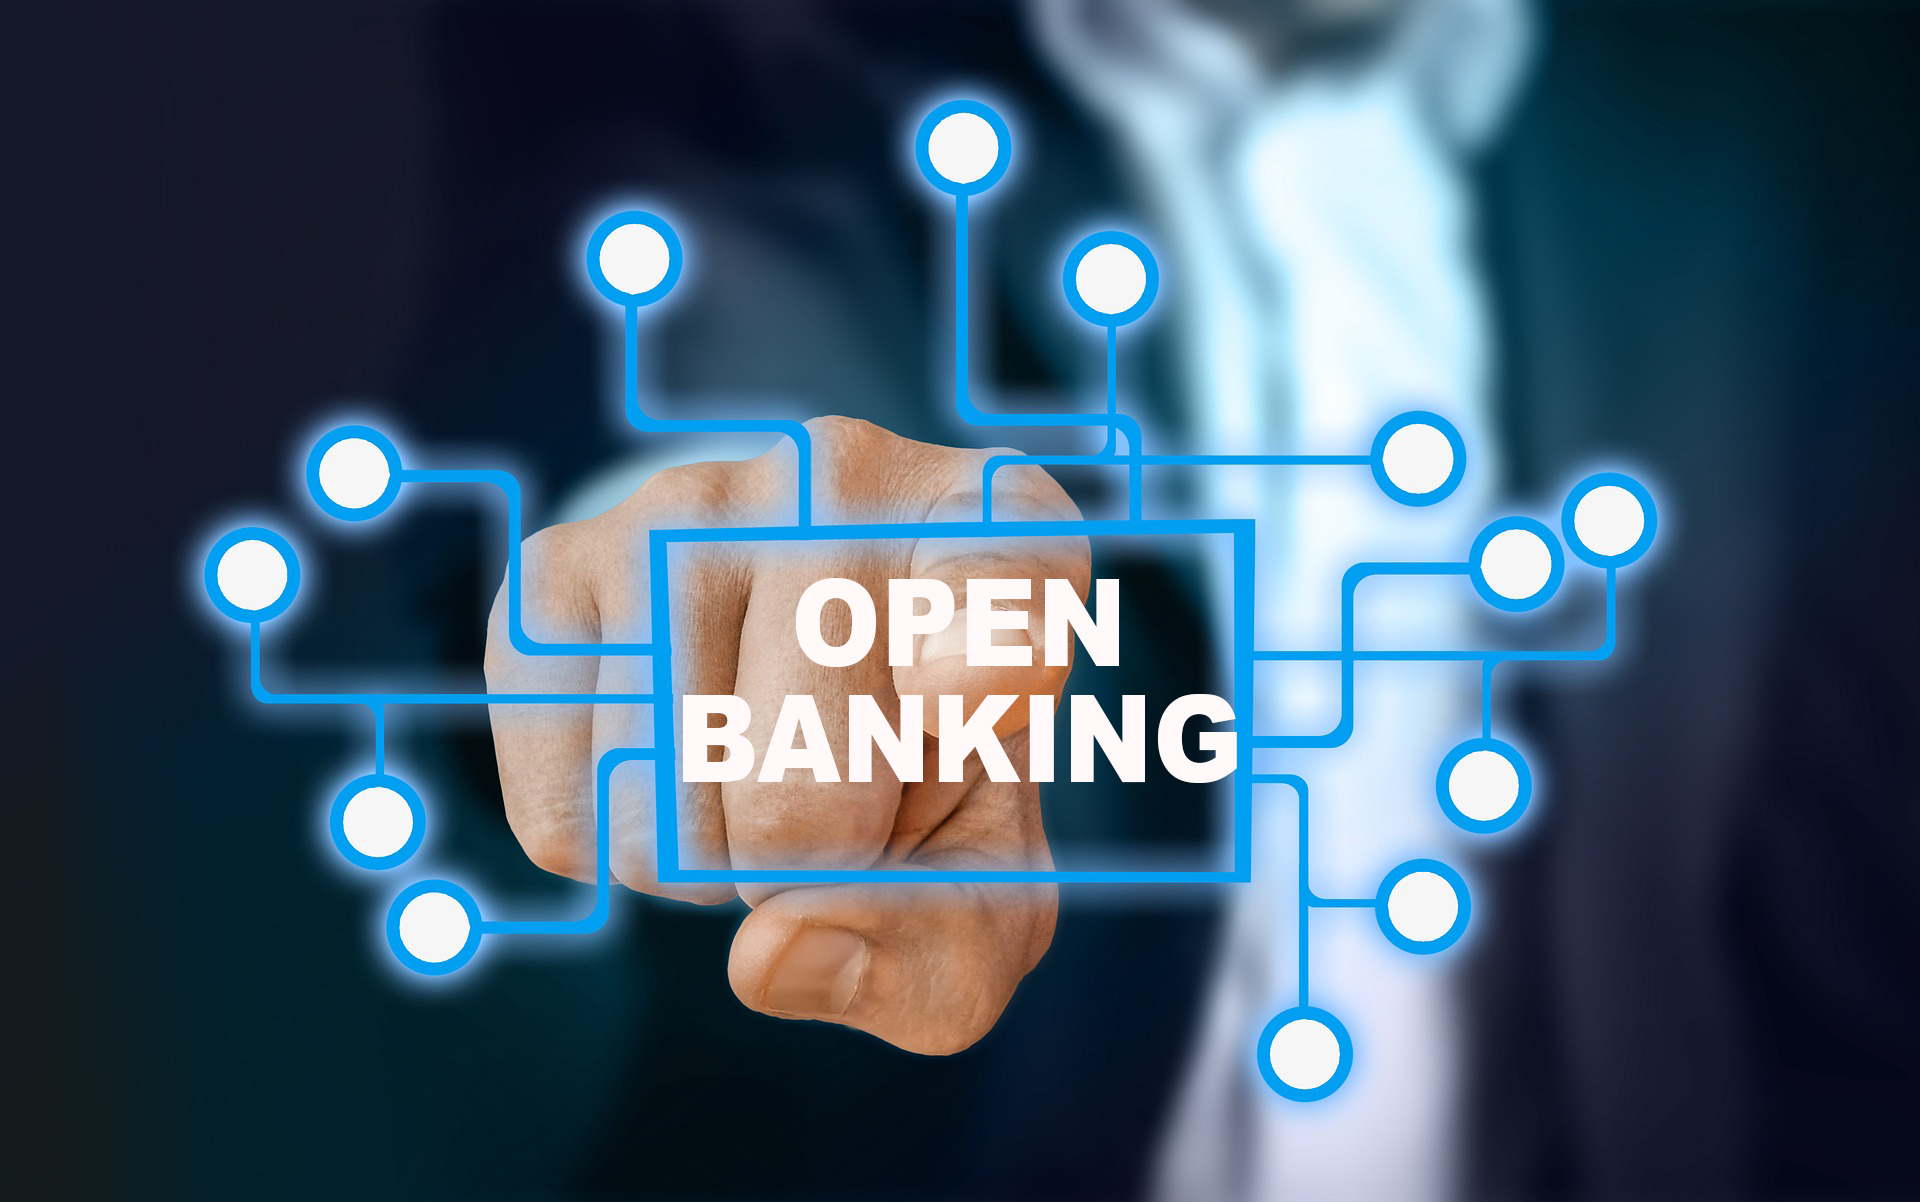 UK's Open Banking to Launch on 13 January 2018